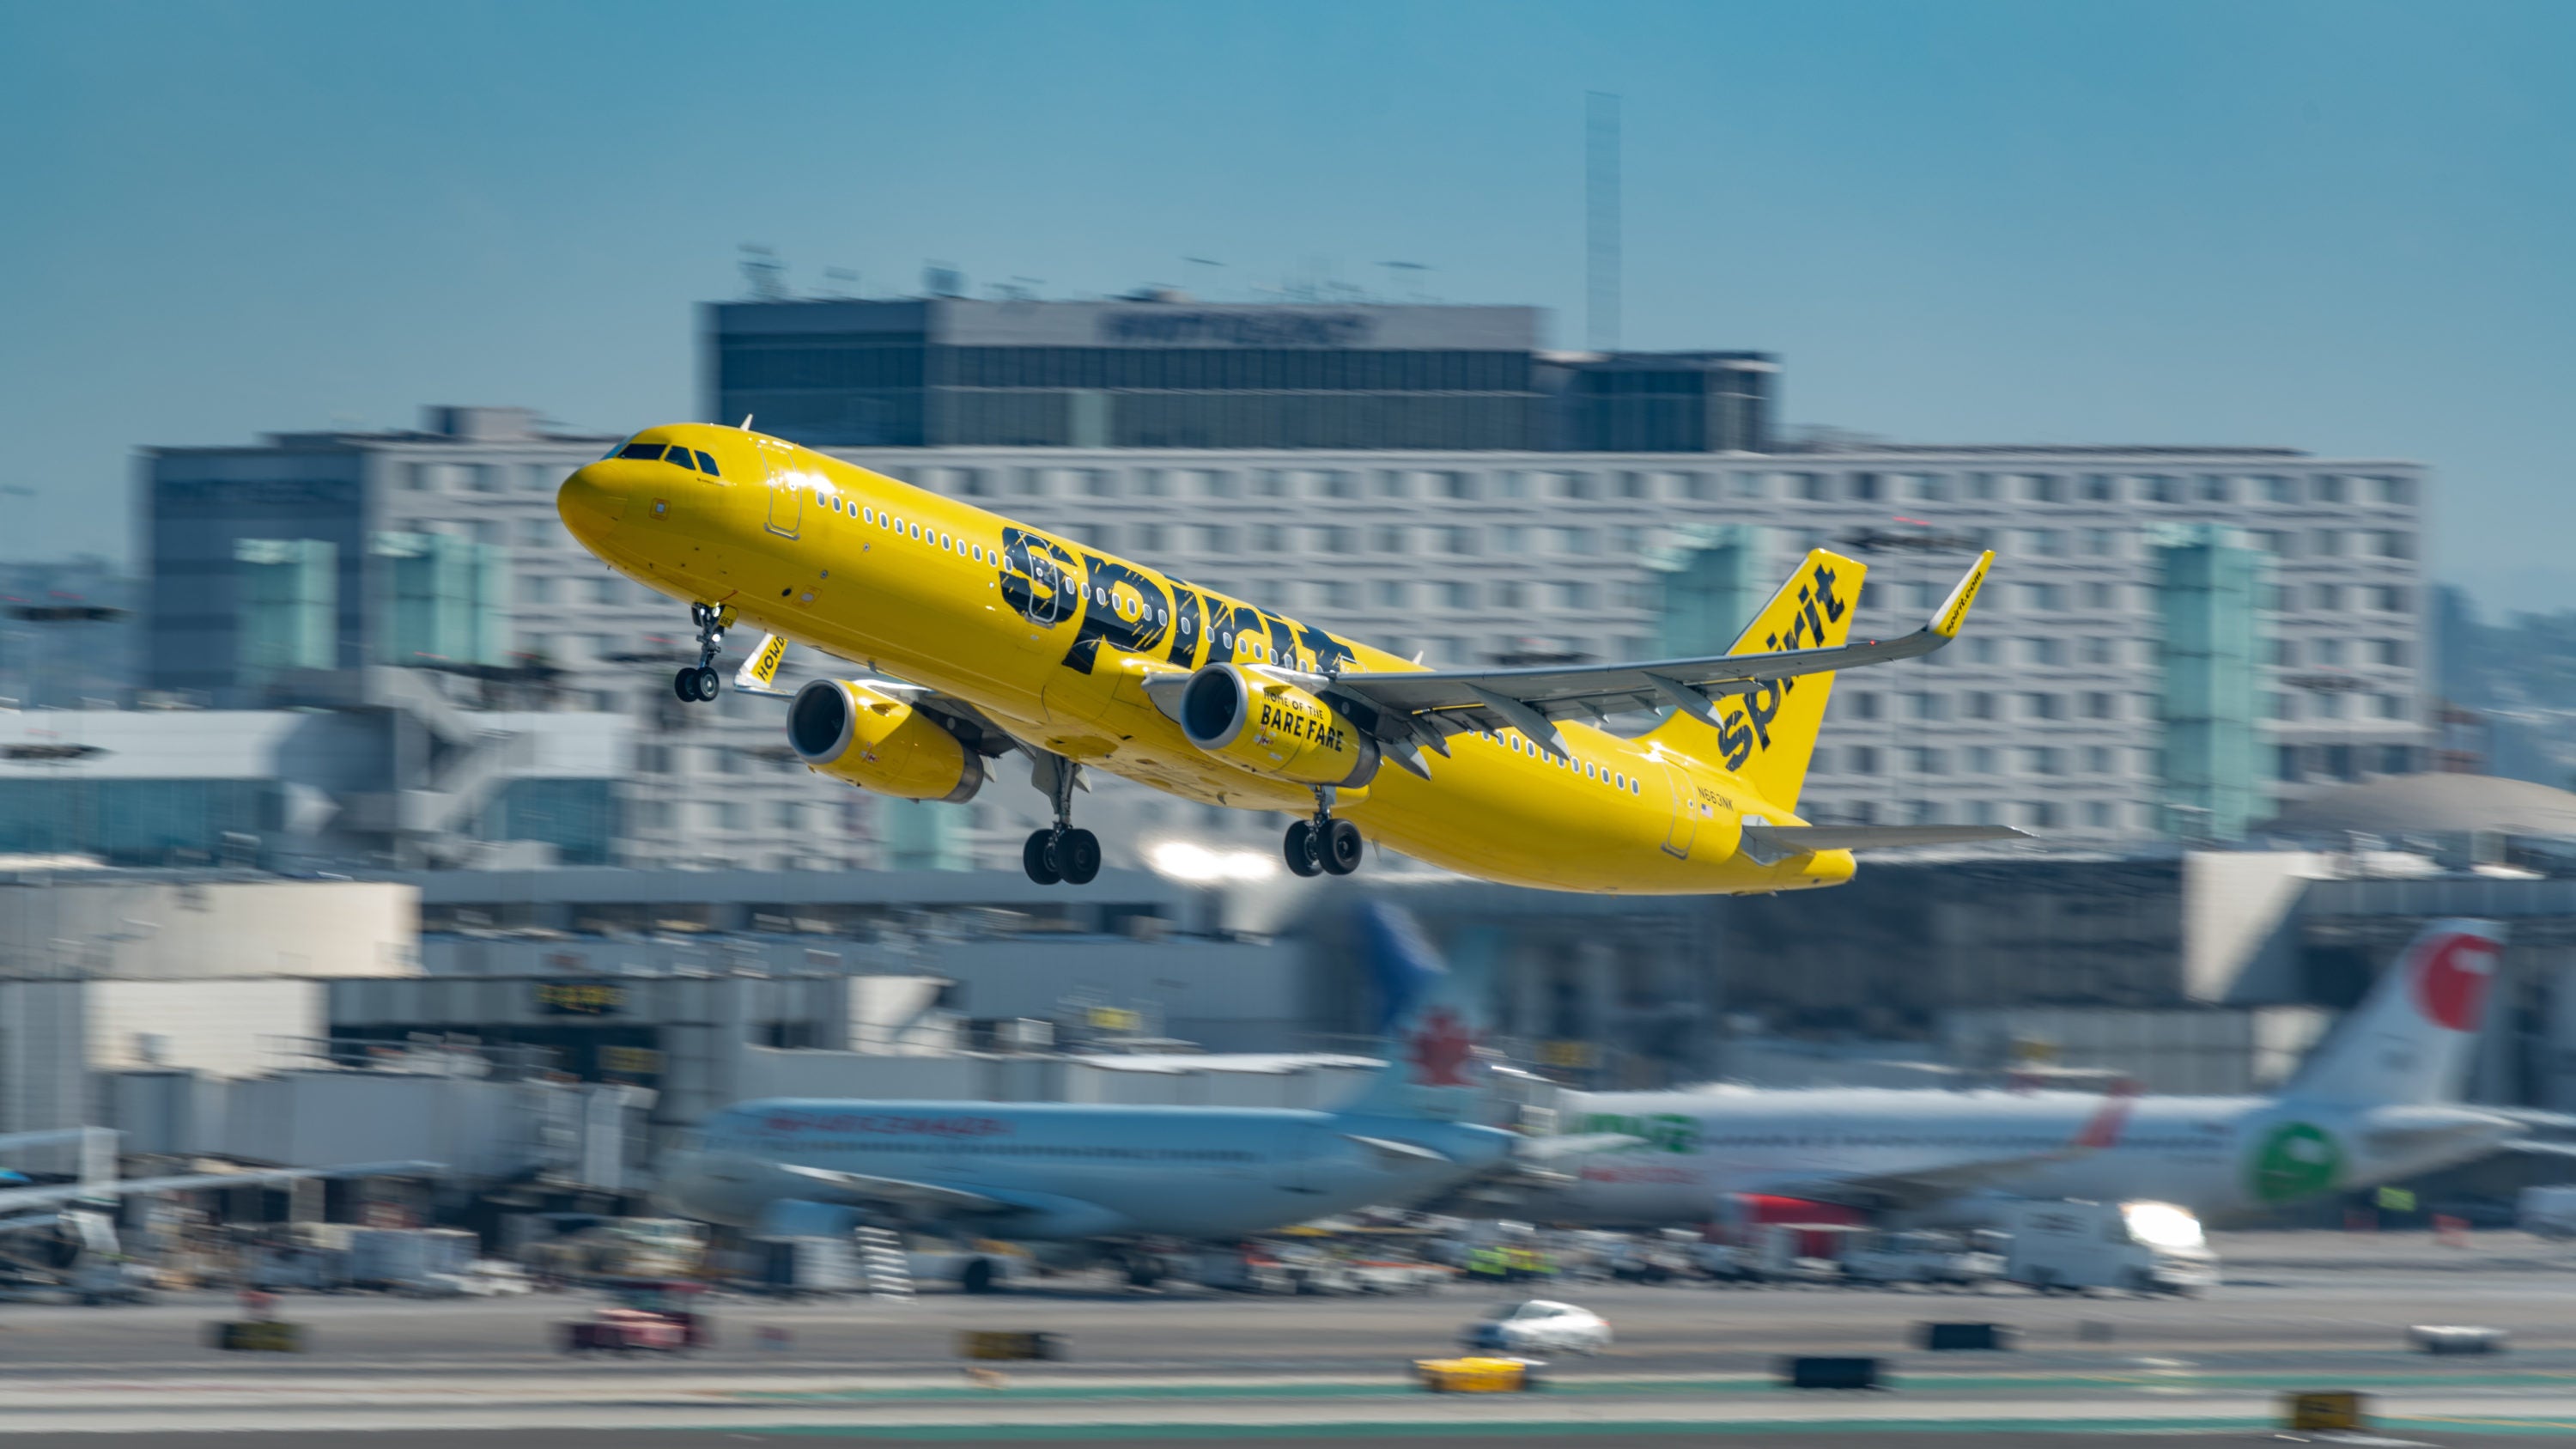 Spirit Airlines A321 departs LAX